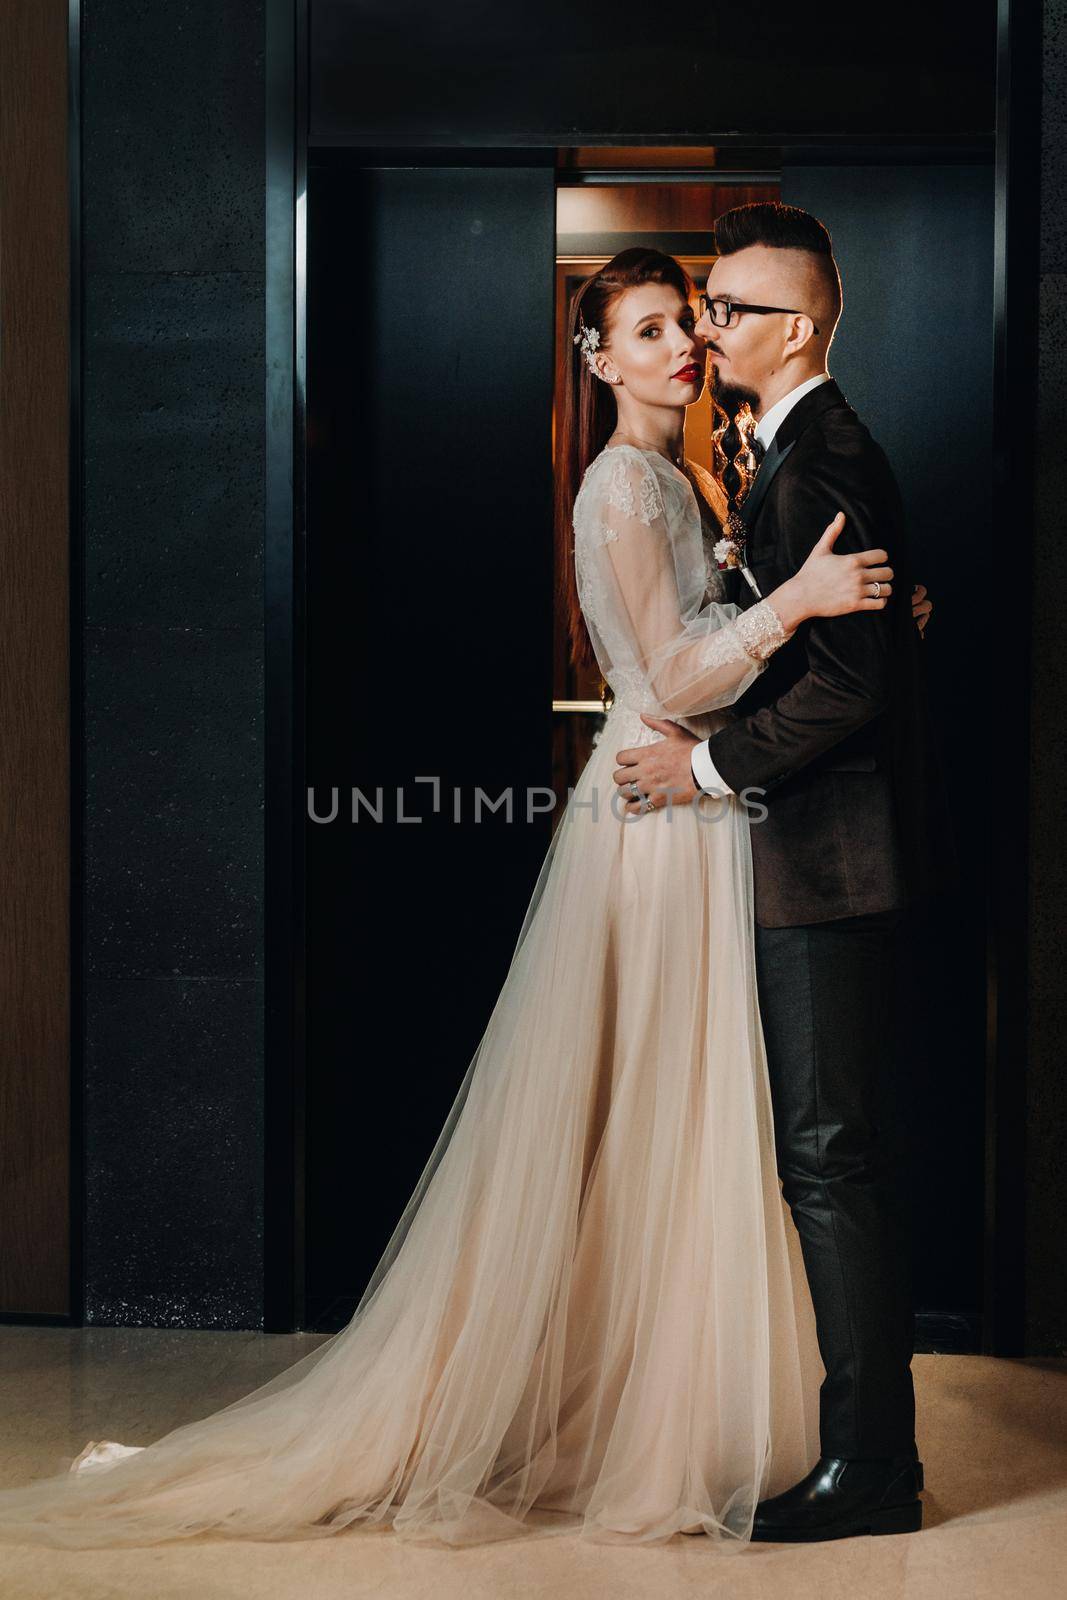 Stylish wedding couple in the interior. Glamorous bride and groom by Lobachad